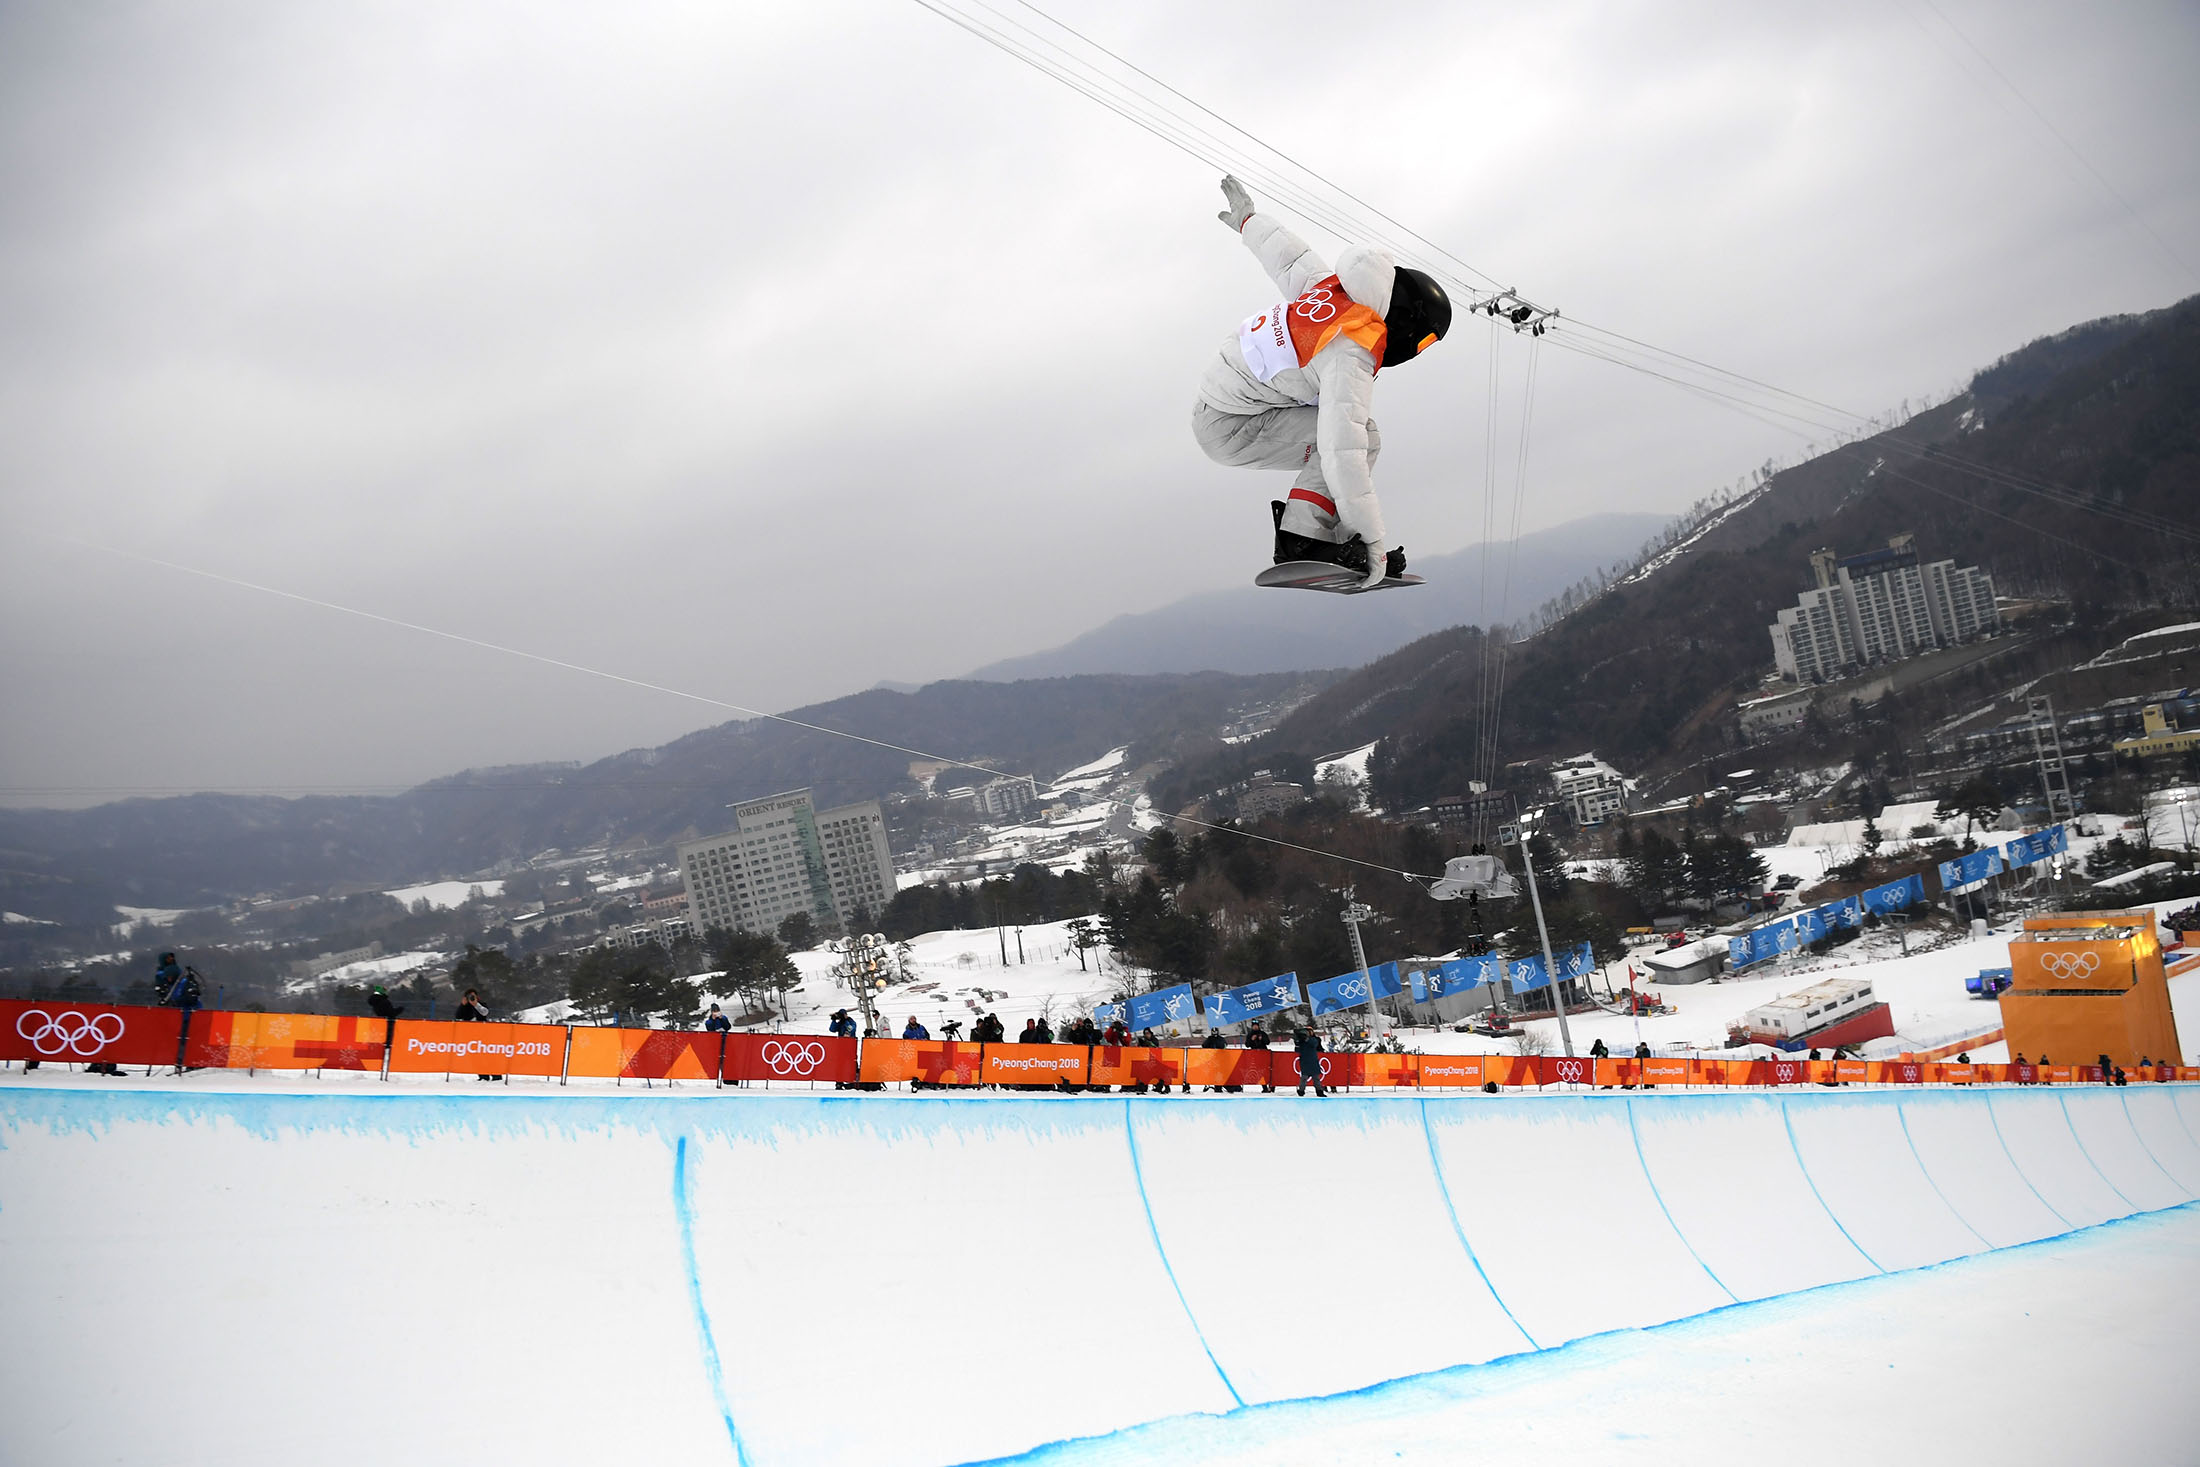 Shaun White has halfpipe, slopestyle training course built in